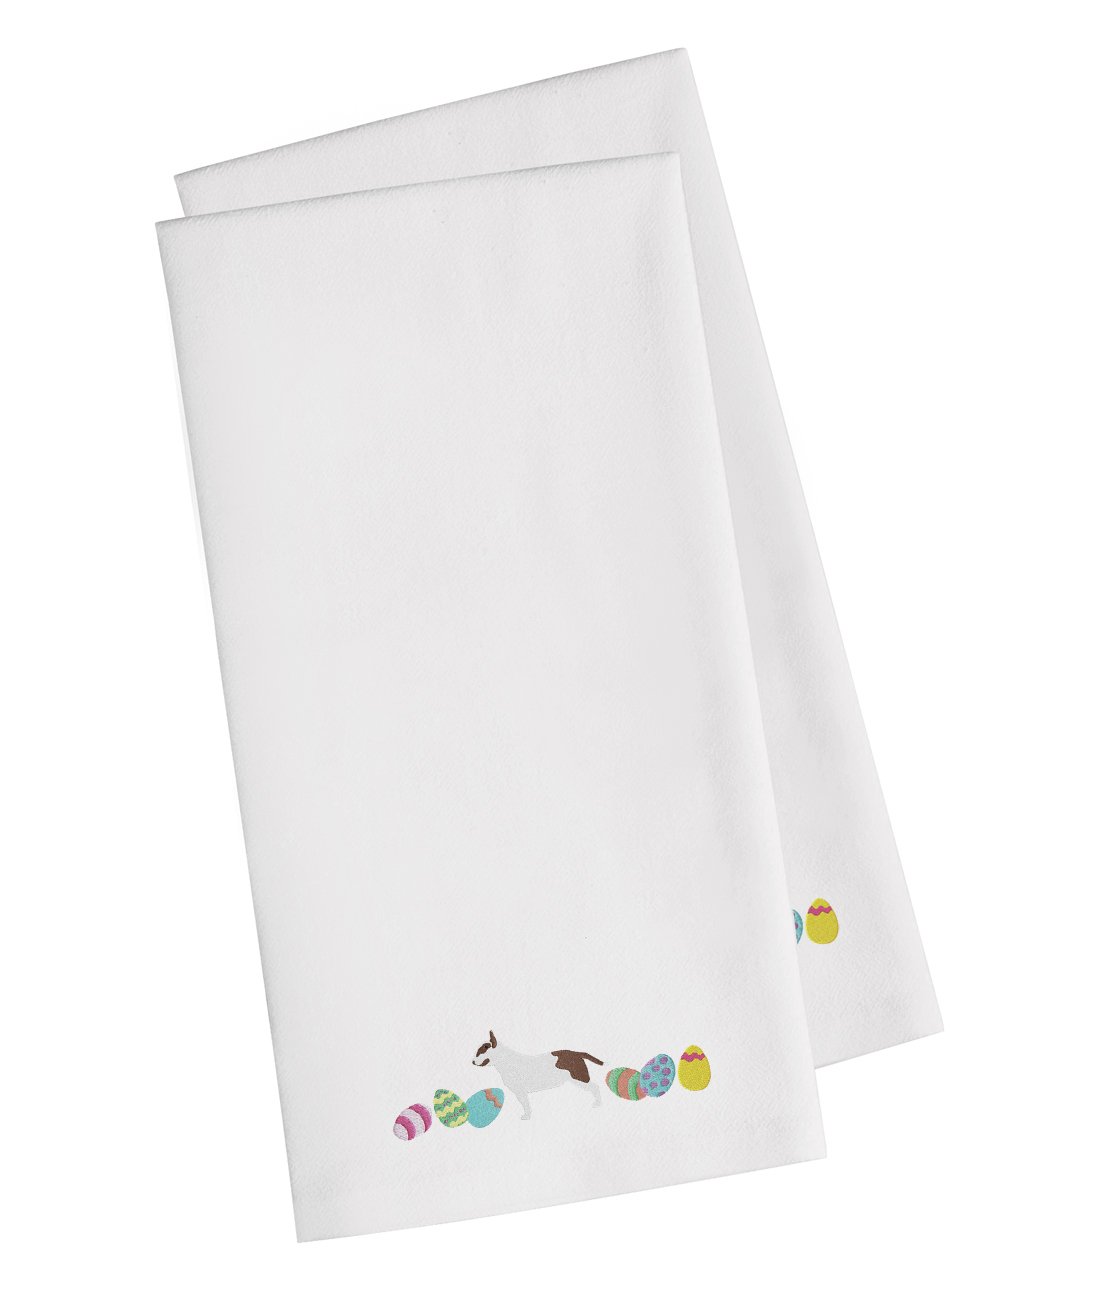 Bull Terrier Easter White Embroidered Kitchen Towel Set of 2 CK1618WHTWE by Caroline's Treasures